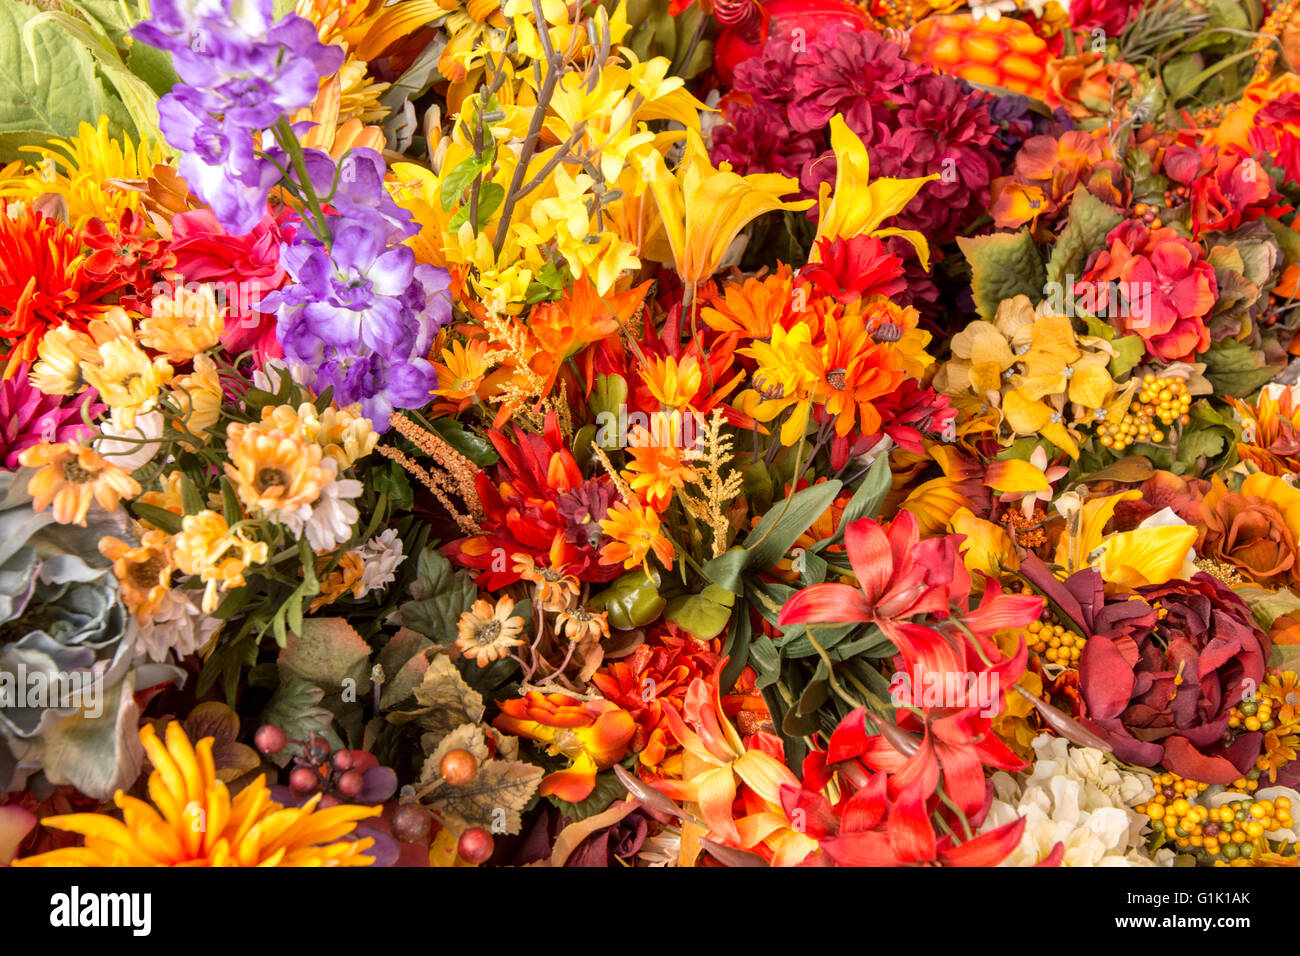 Large cluster of vibrant colored flowers at market Stock Photo